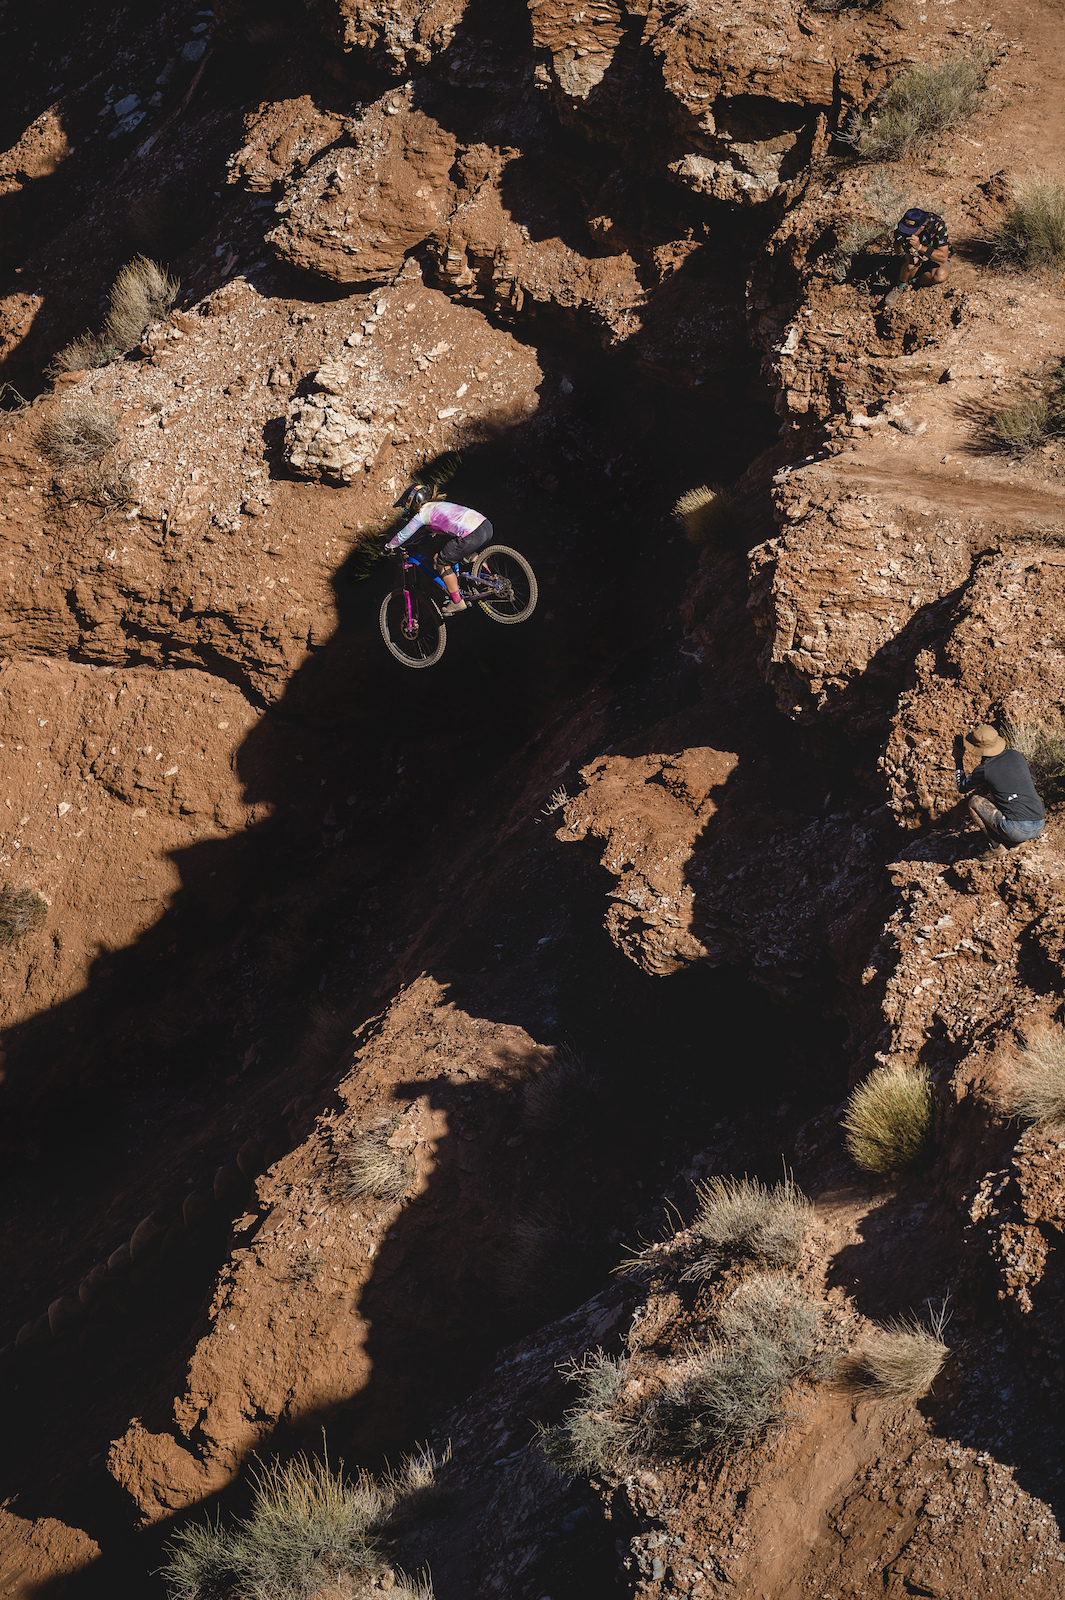 Chelsea Kimball hits her drop at Red Bull Formation in Virgin, Utah, USA on 31 May, 2021